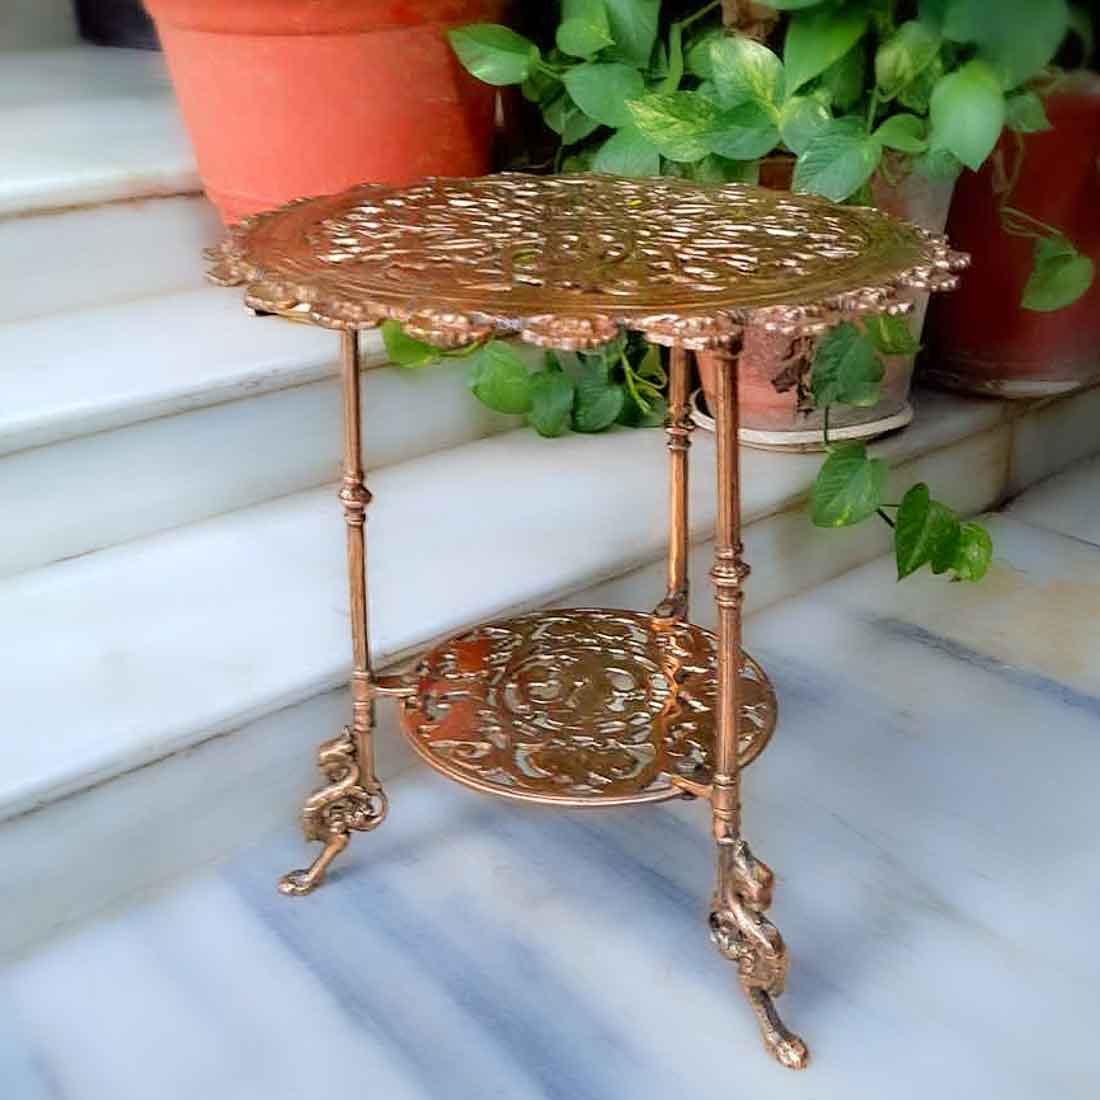 Side Table | End Table In Metal | Coffee Tables - for Living Room, Bedside, Sofa Side Stool, Corners, Home Decor & Gifts | Vintage Center Table - 17 Inch